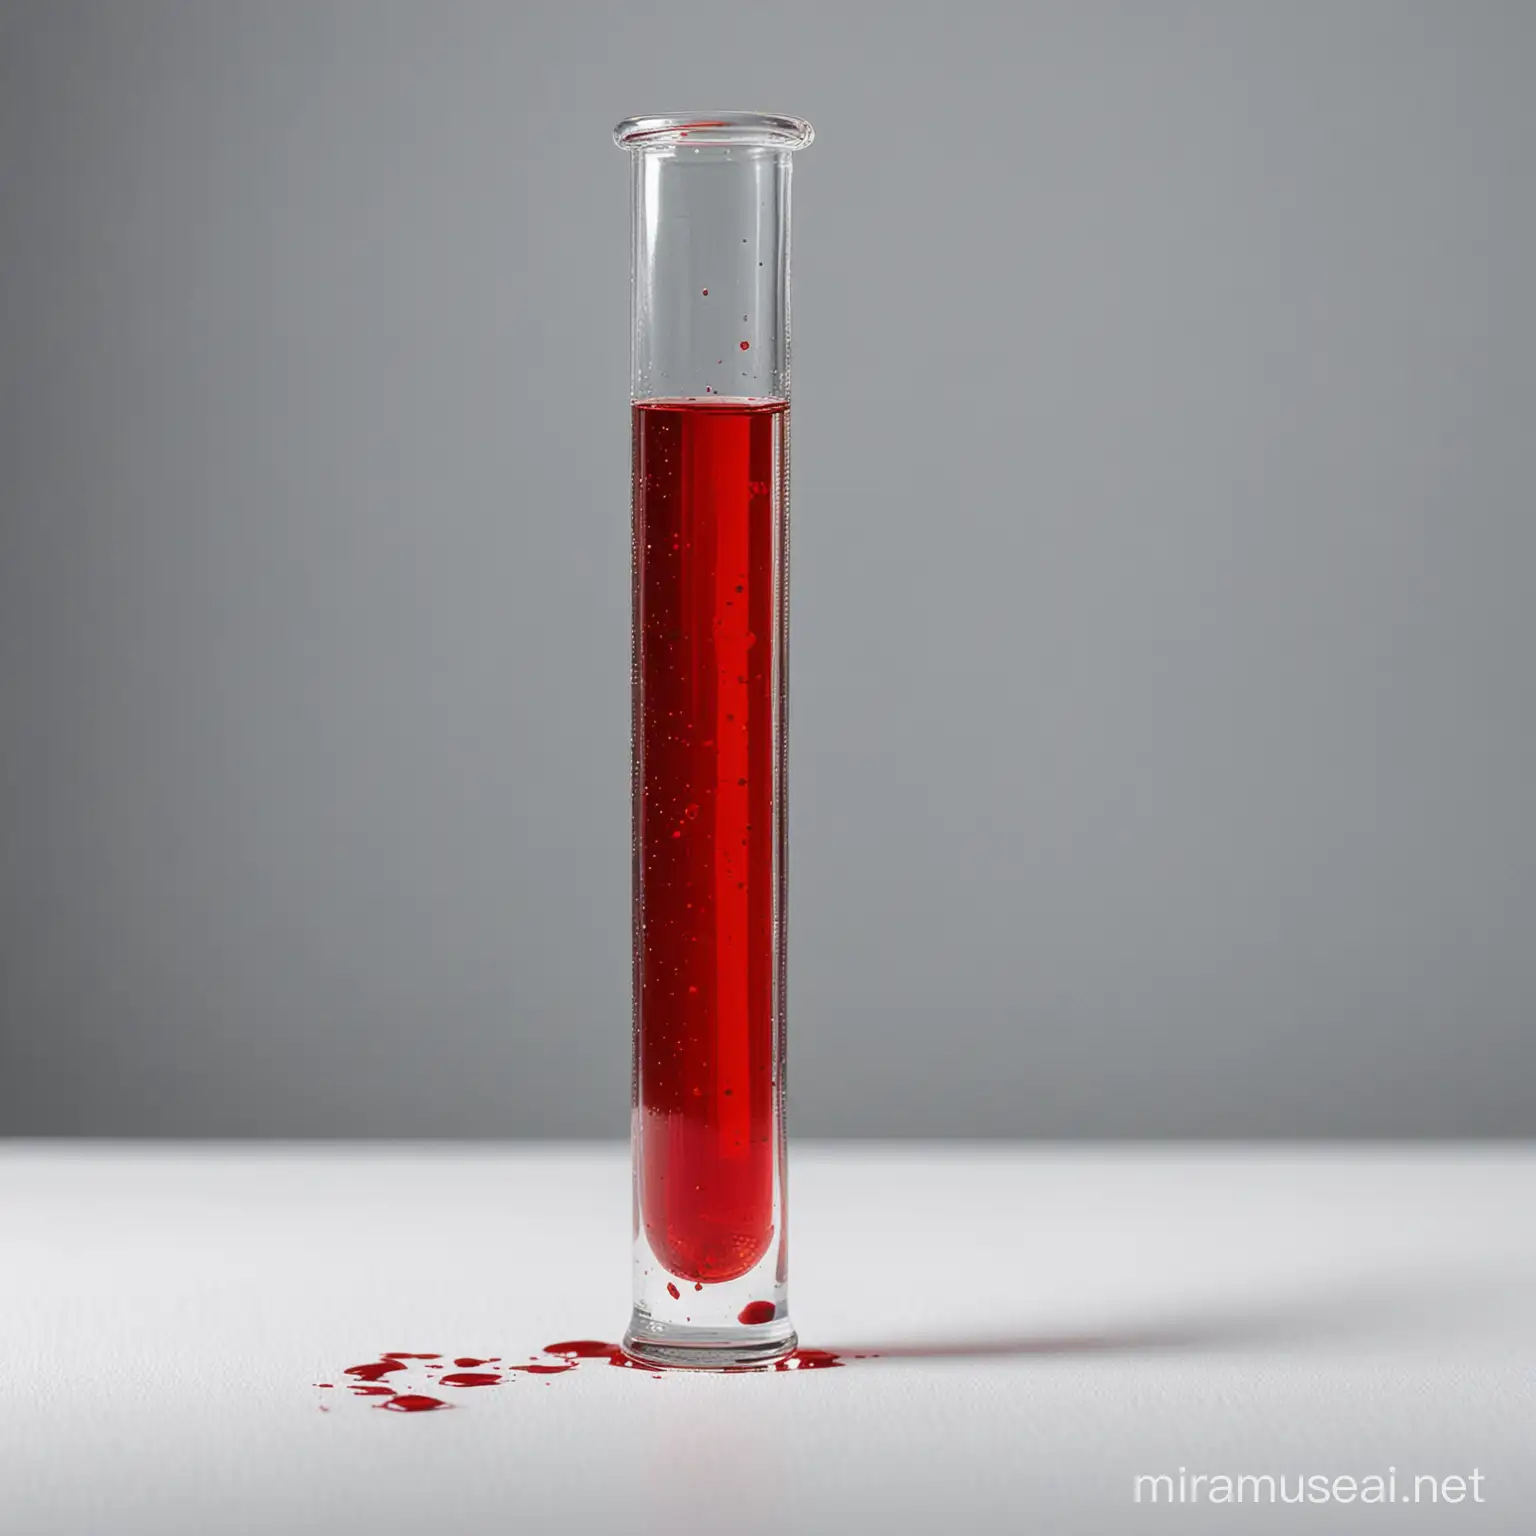 Canon 2470mm f28 Captured Medical Test Tube with Blood